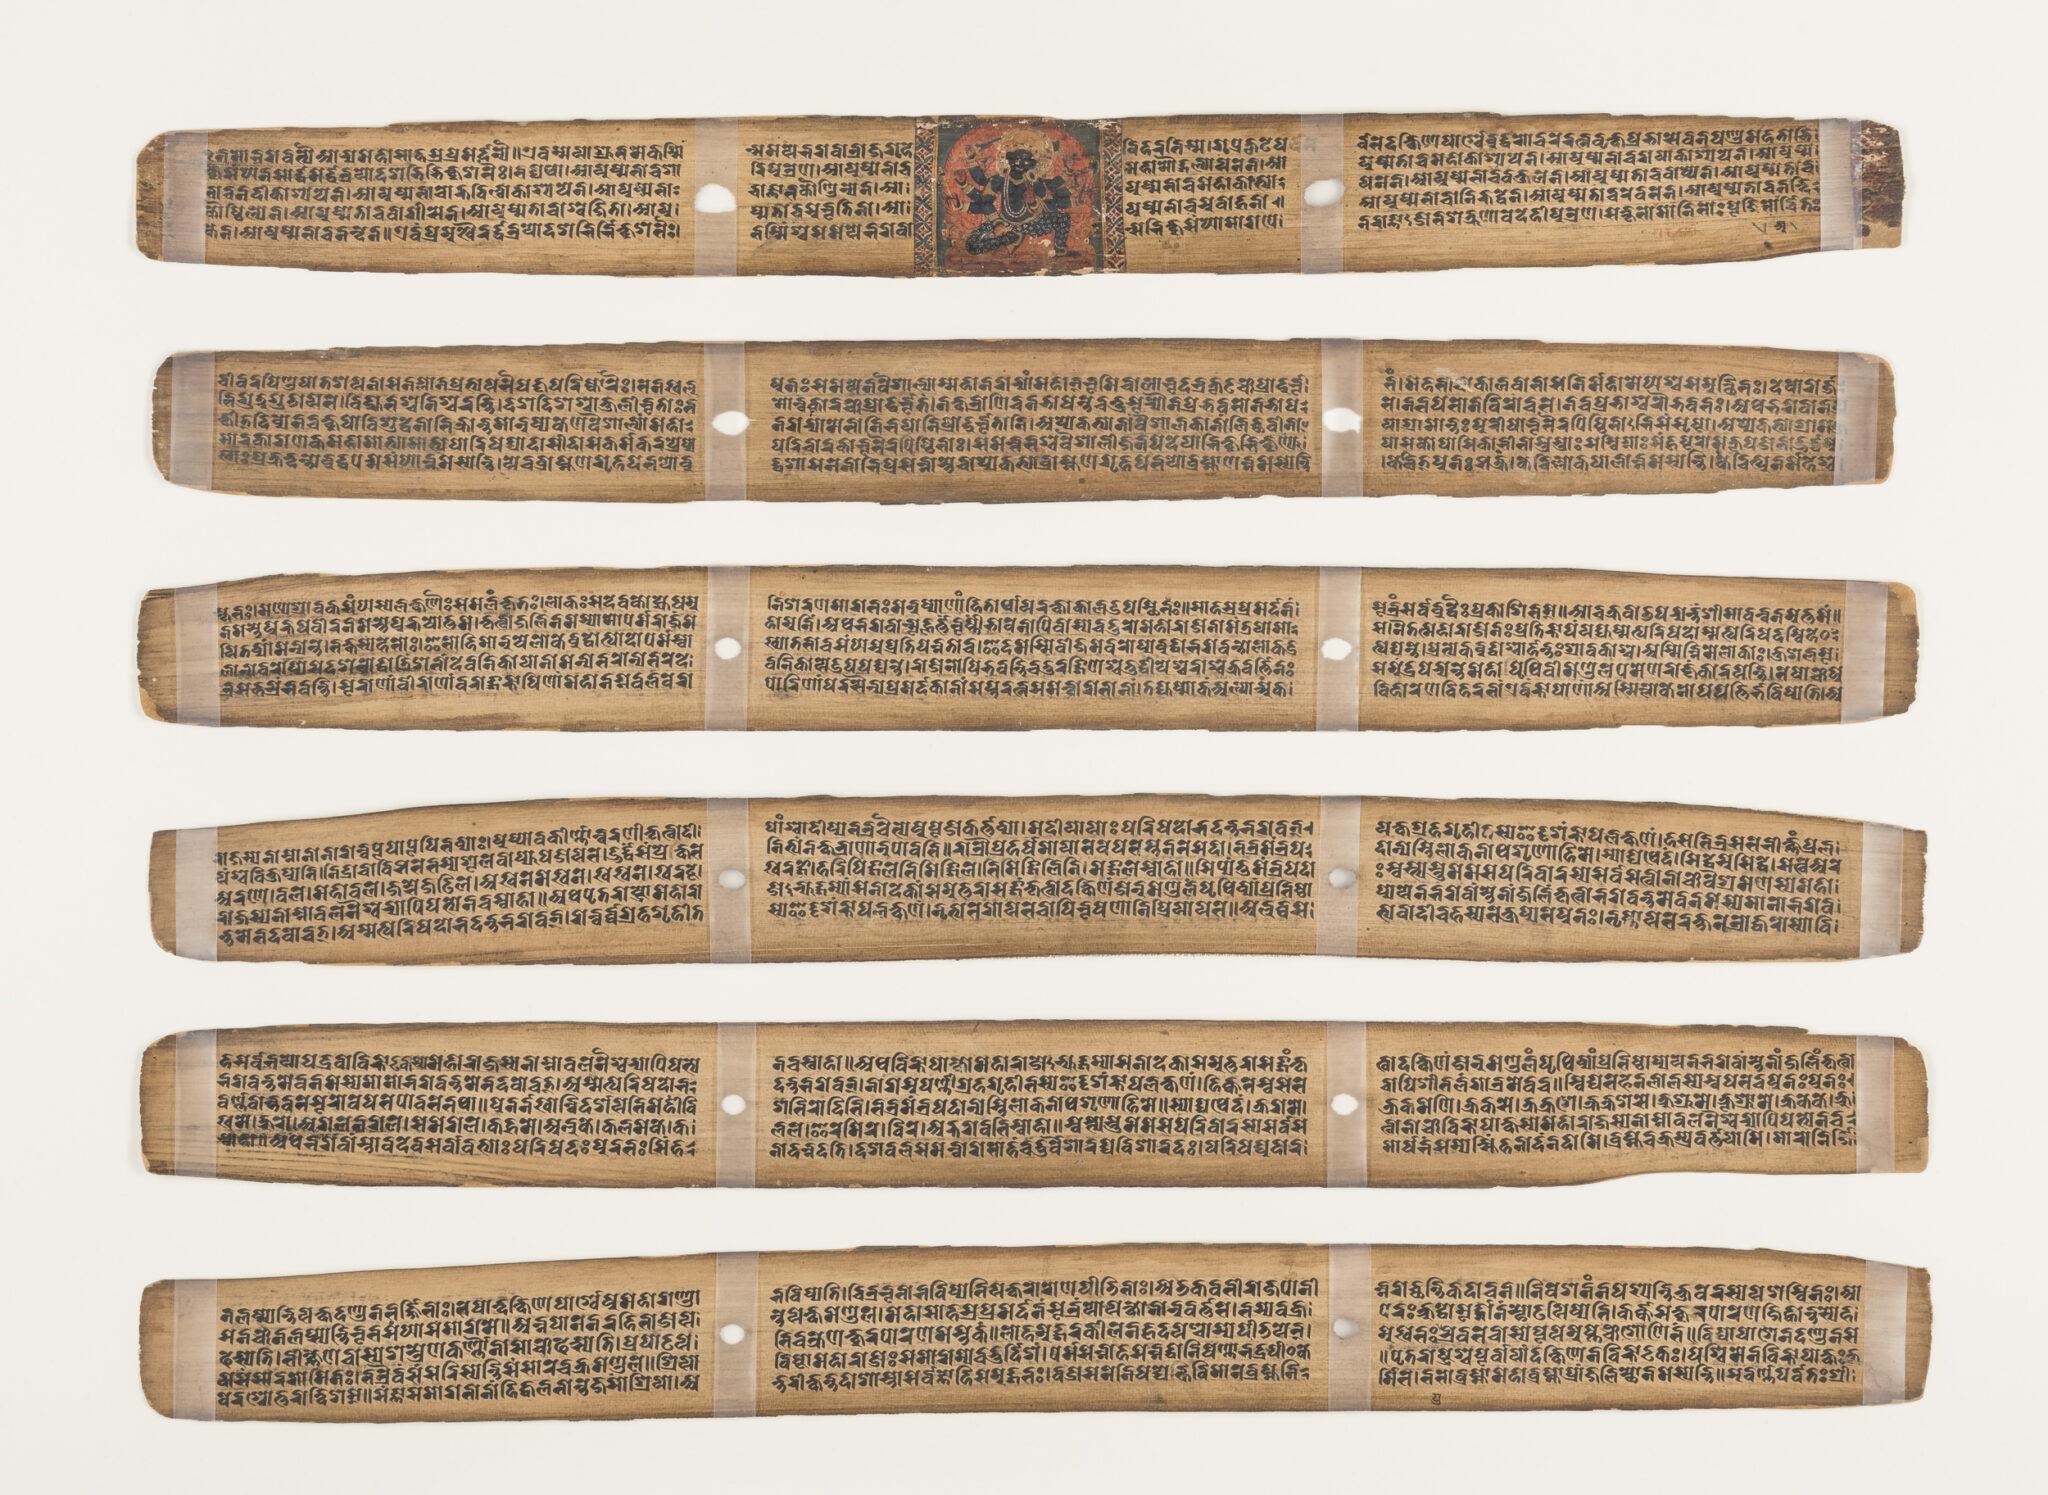 Six long rectangular pages bearing script and two puncture holes each; top page features deity portrait in center